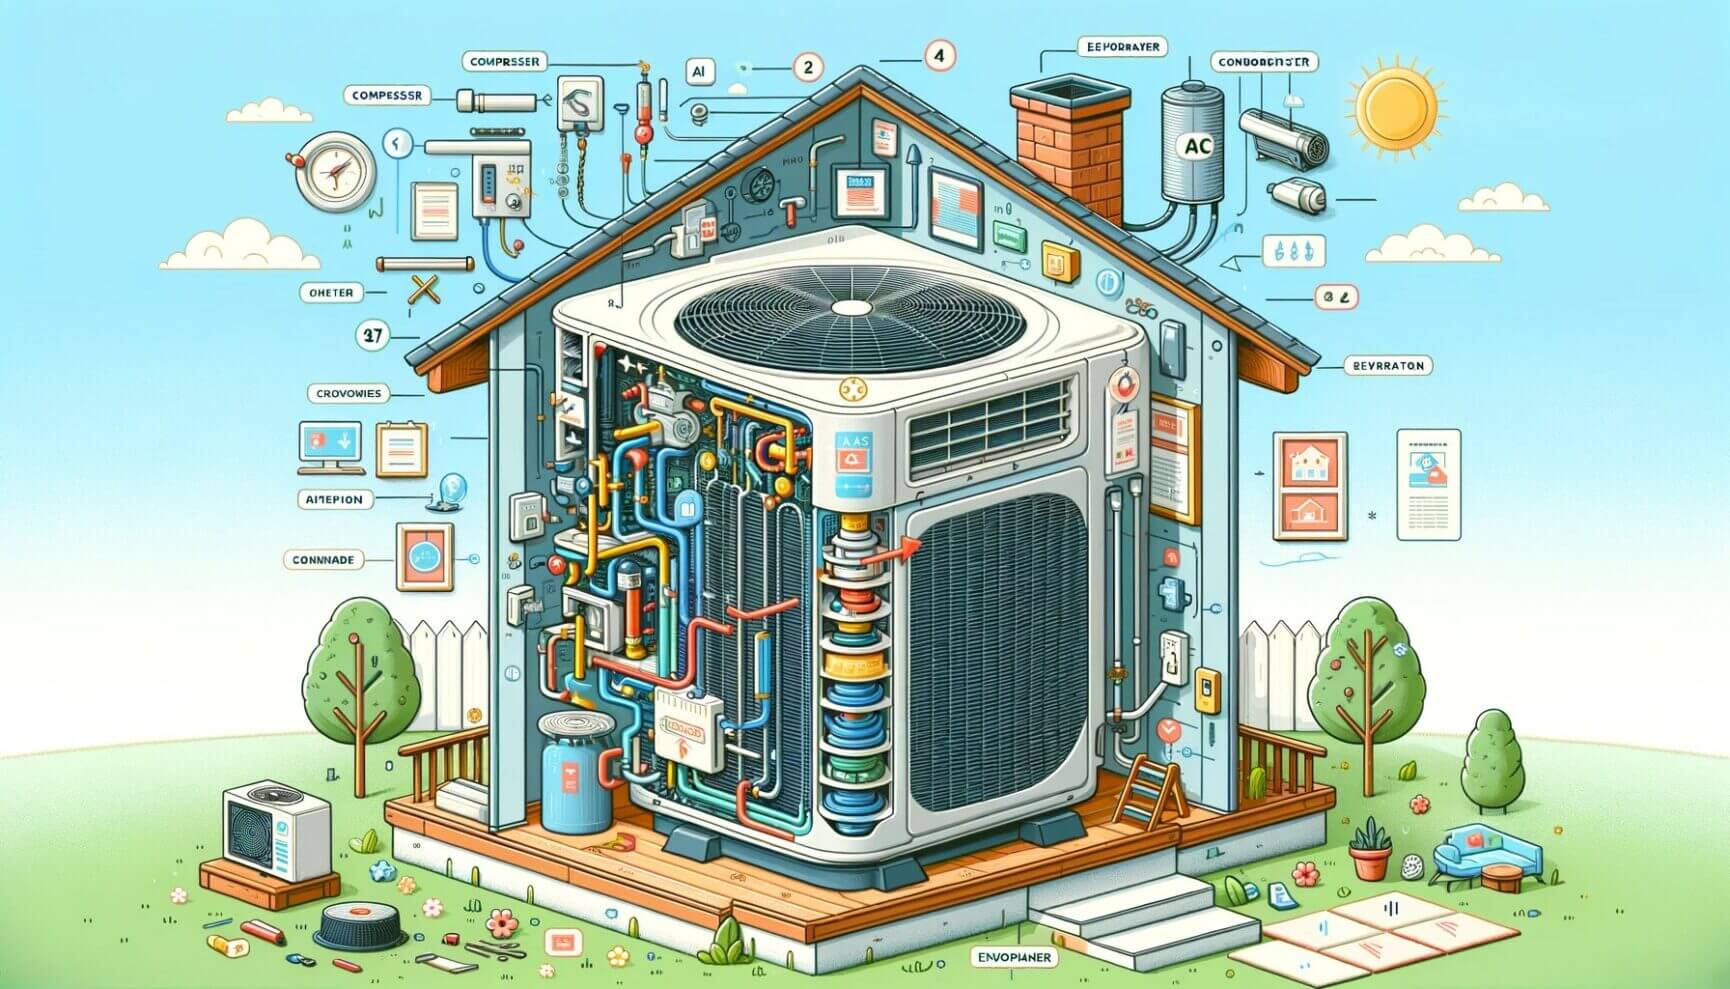 An illustration of an air conditioner in a house.